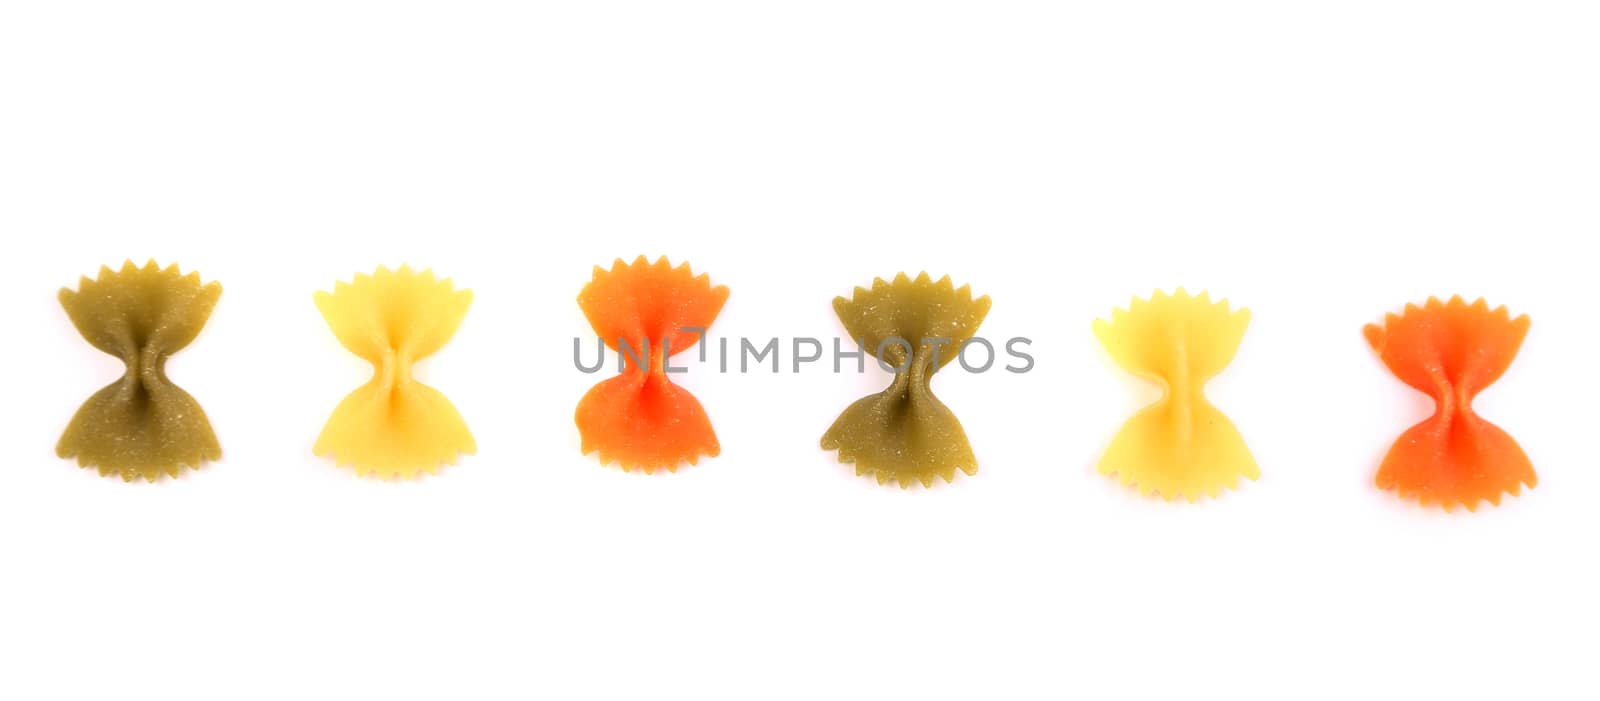 Pasta farfalle three colors are located on the white background.